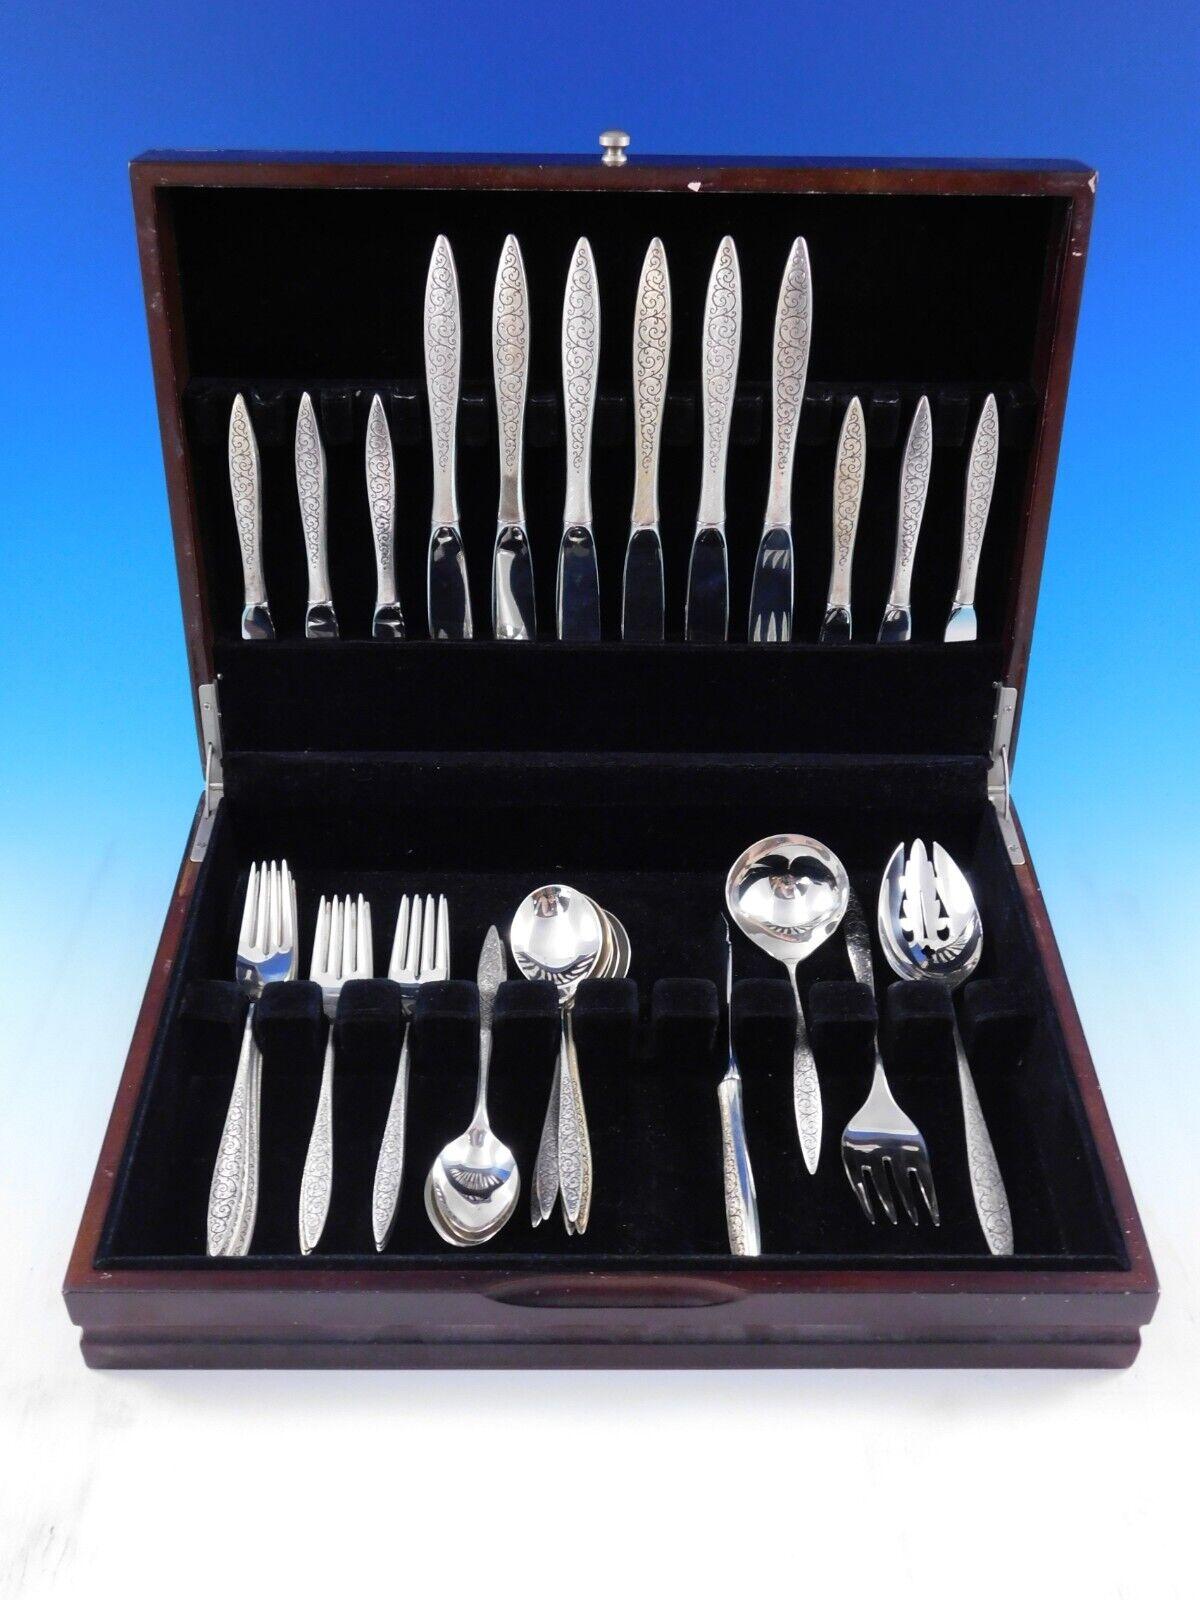 Spanish Lace by Wallace Sterling Silver flatware set - 40 pieces. This set includes:

6 Knives, 9 1/4